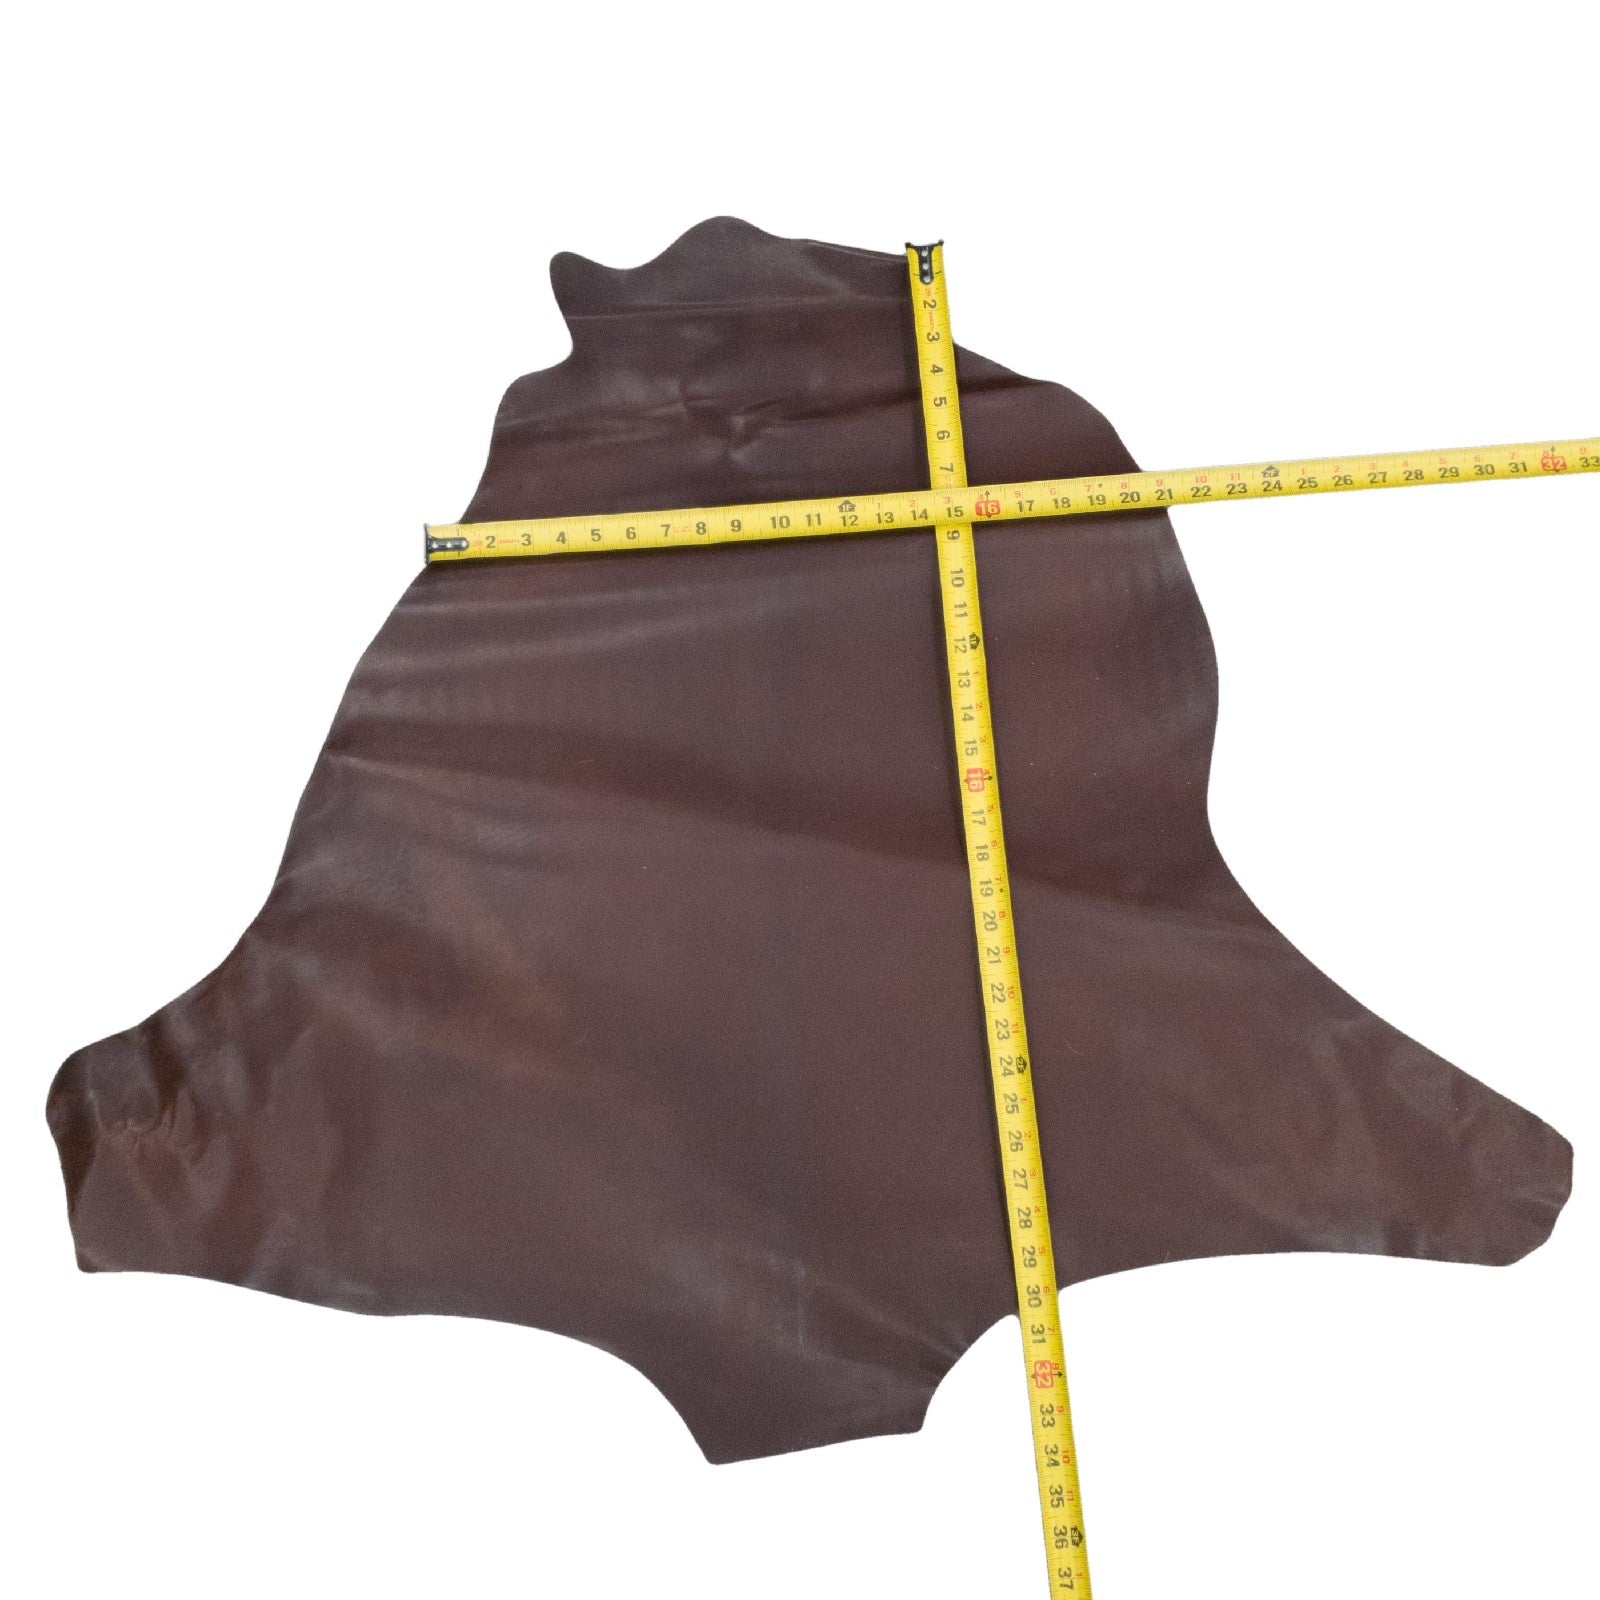 Kangaroo Chocolate Dyed Veg Tanned 5 - 7 Sq Ft Hides 2-3 oz, 5 Sq Ft / Hide 1 | The Leather Guy